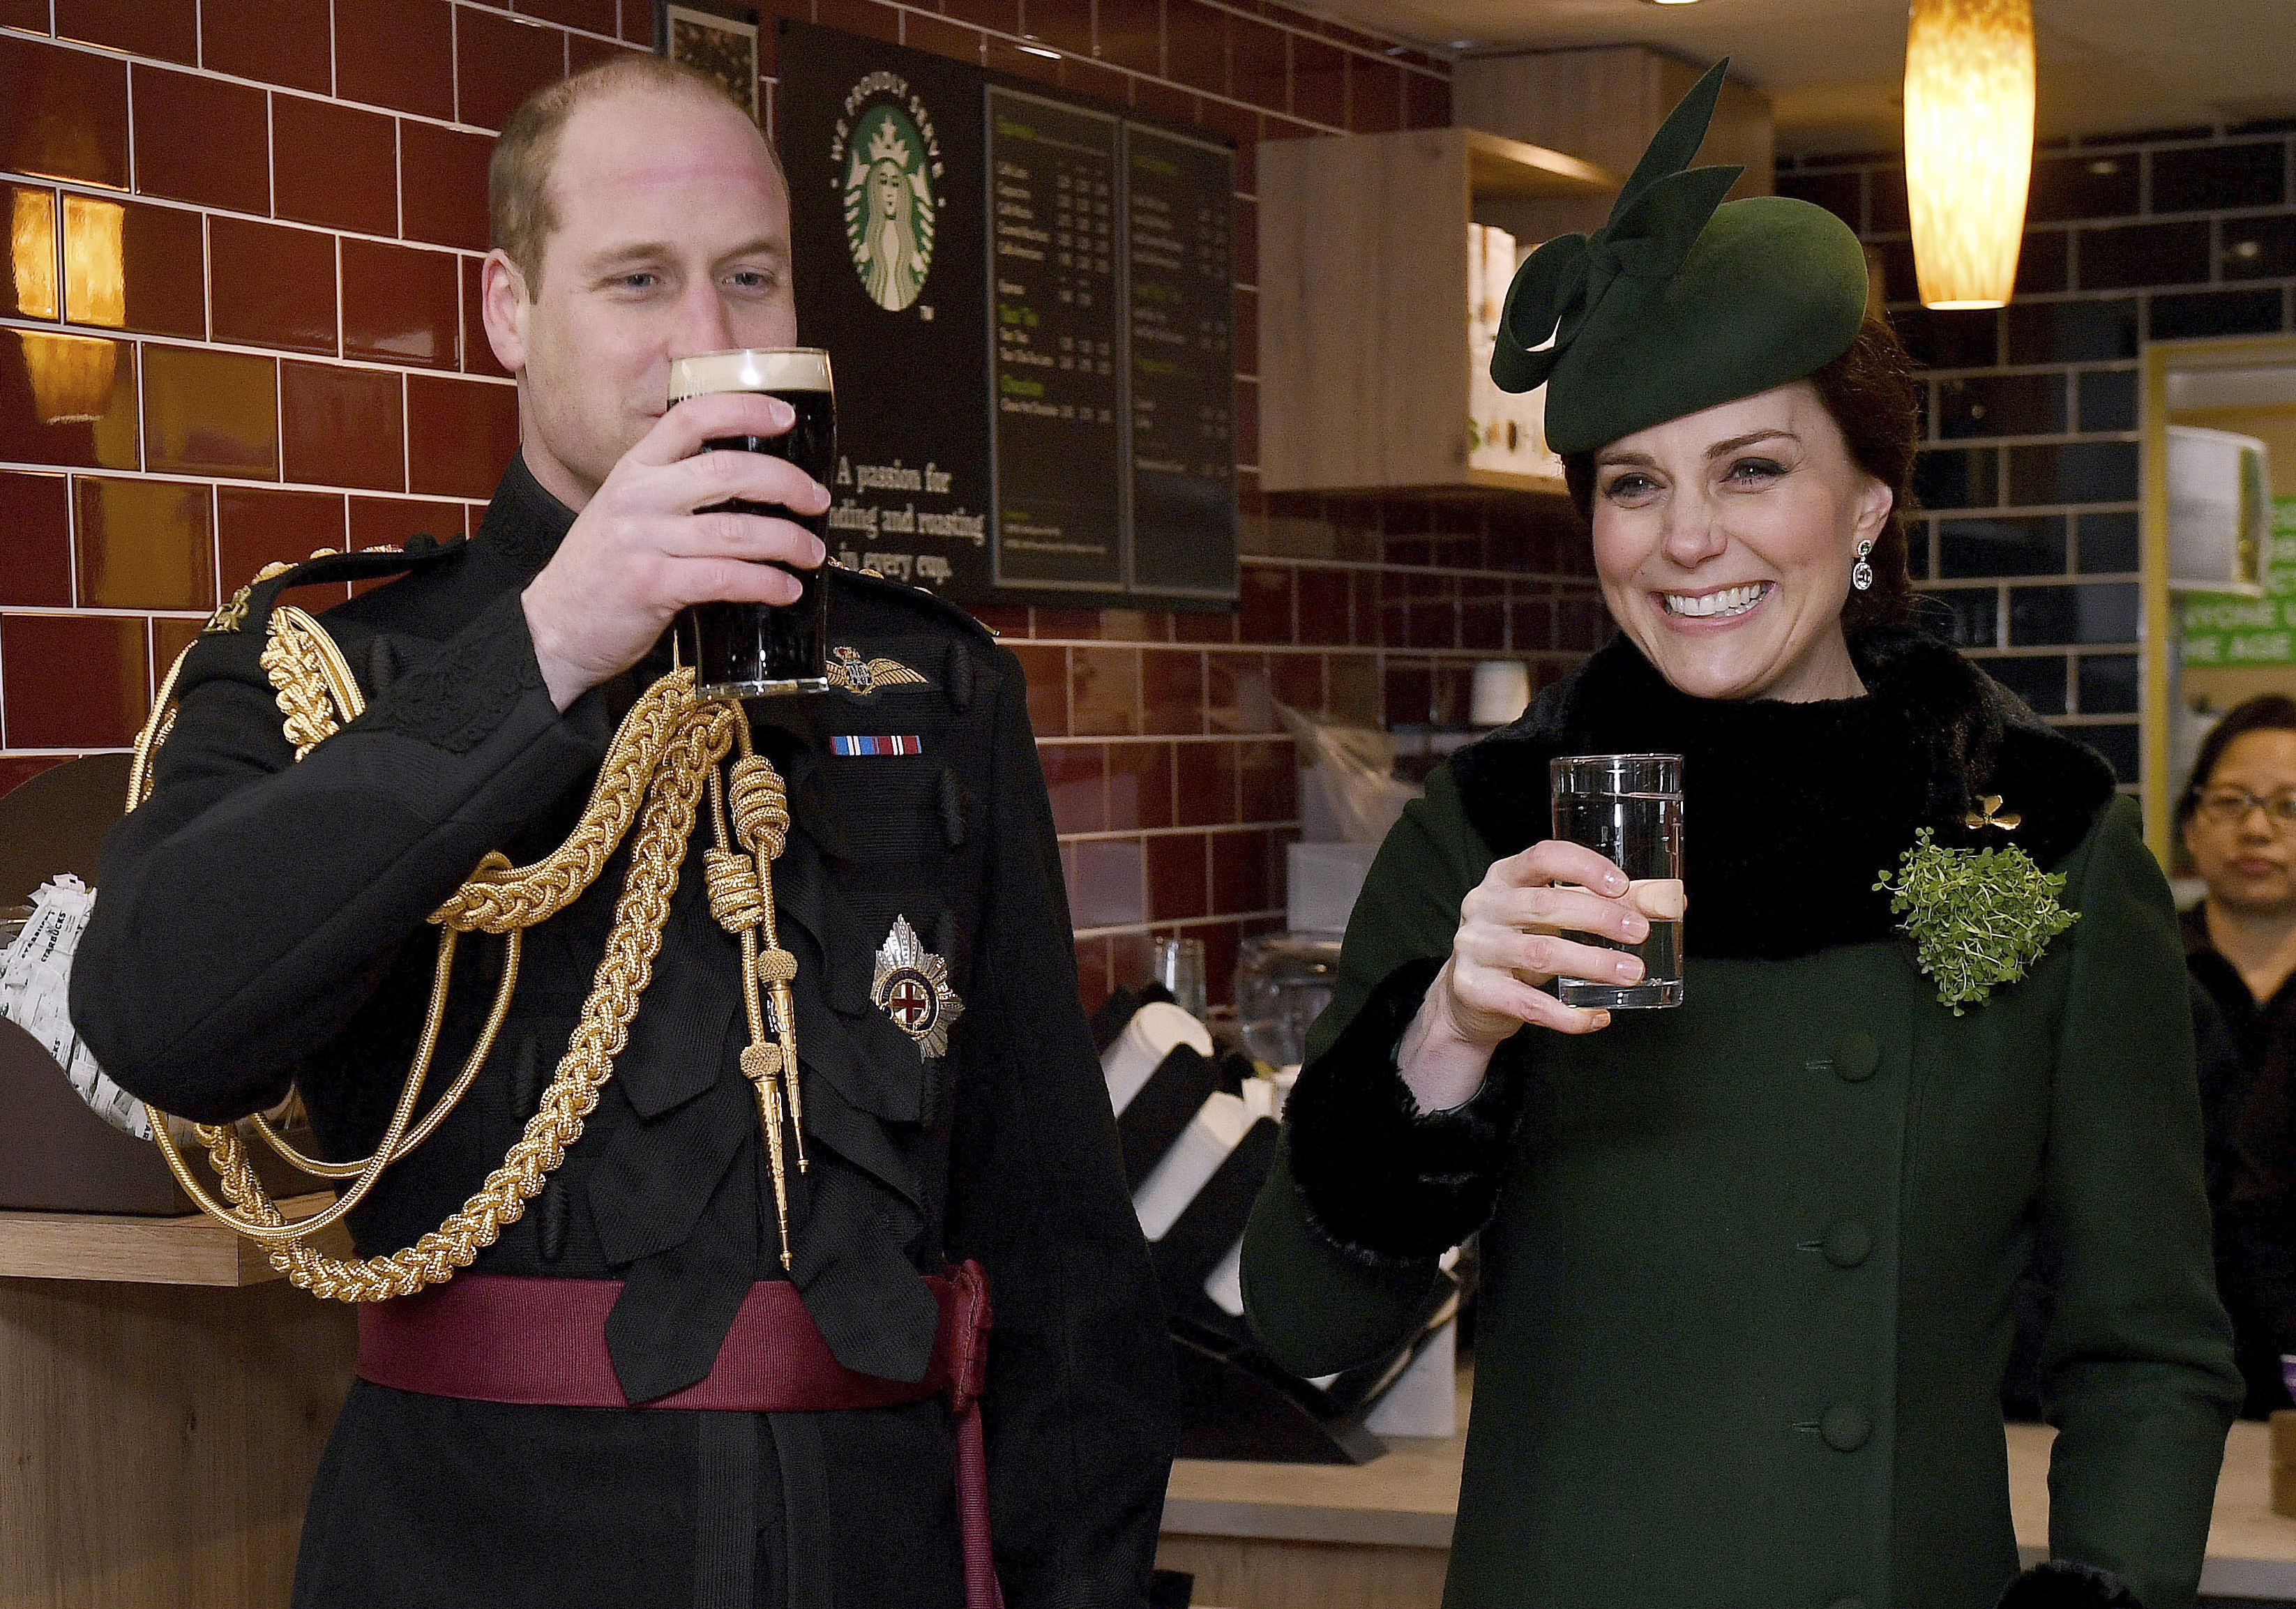 Britain's Kate, the Duchess of Cambridge, smiles as she and Prince William toast, as they visit the 1st Battalion Irish Guards, for the St. Patrick's Day Parade, at Cavalry Barracks, in Hounslow, England, Saturday, March 17, 2018.  (Andrew Parsons/Pool Photo via AP)